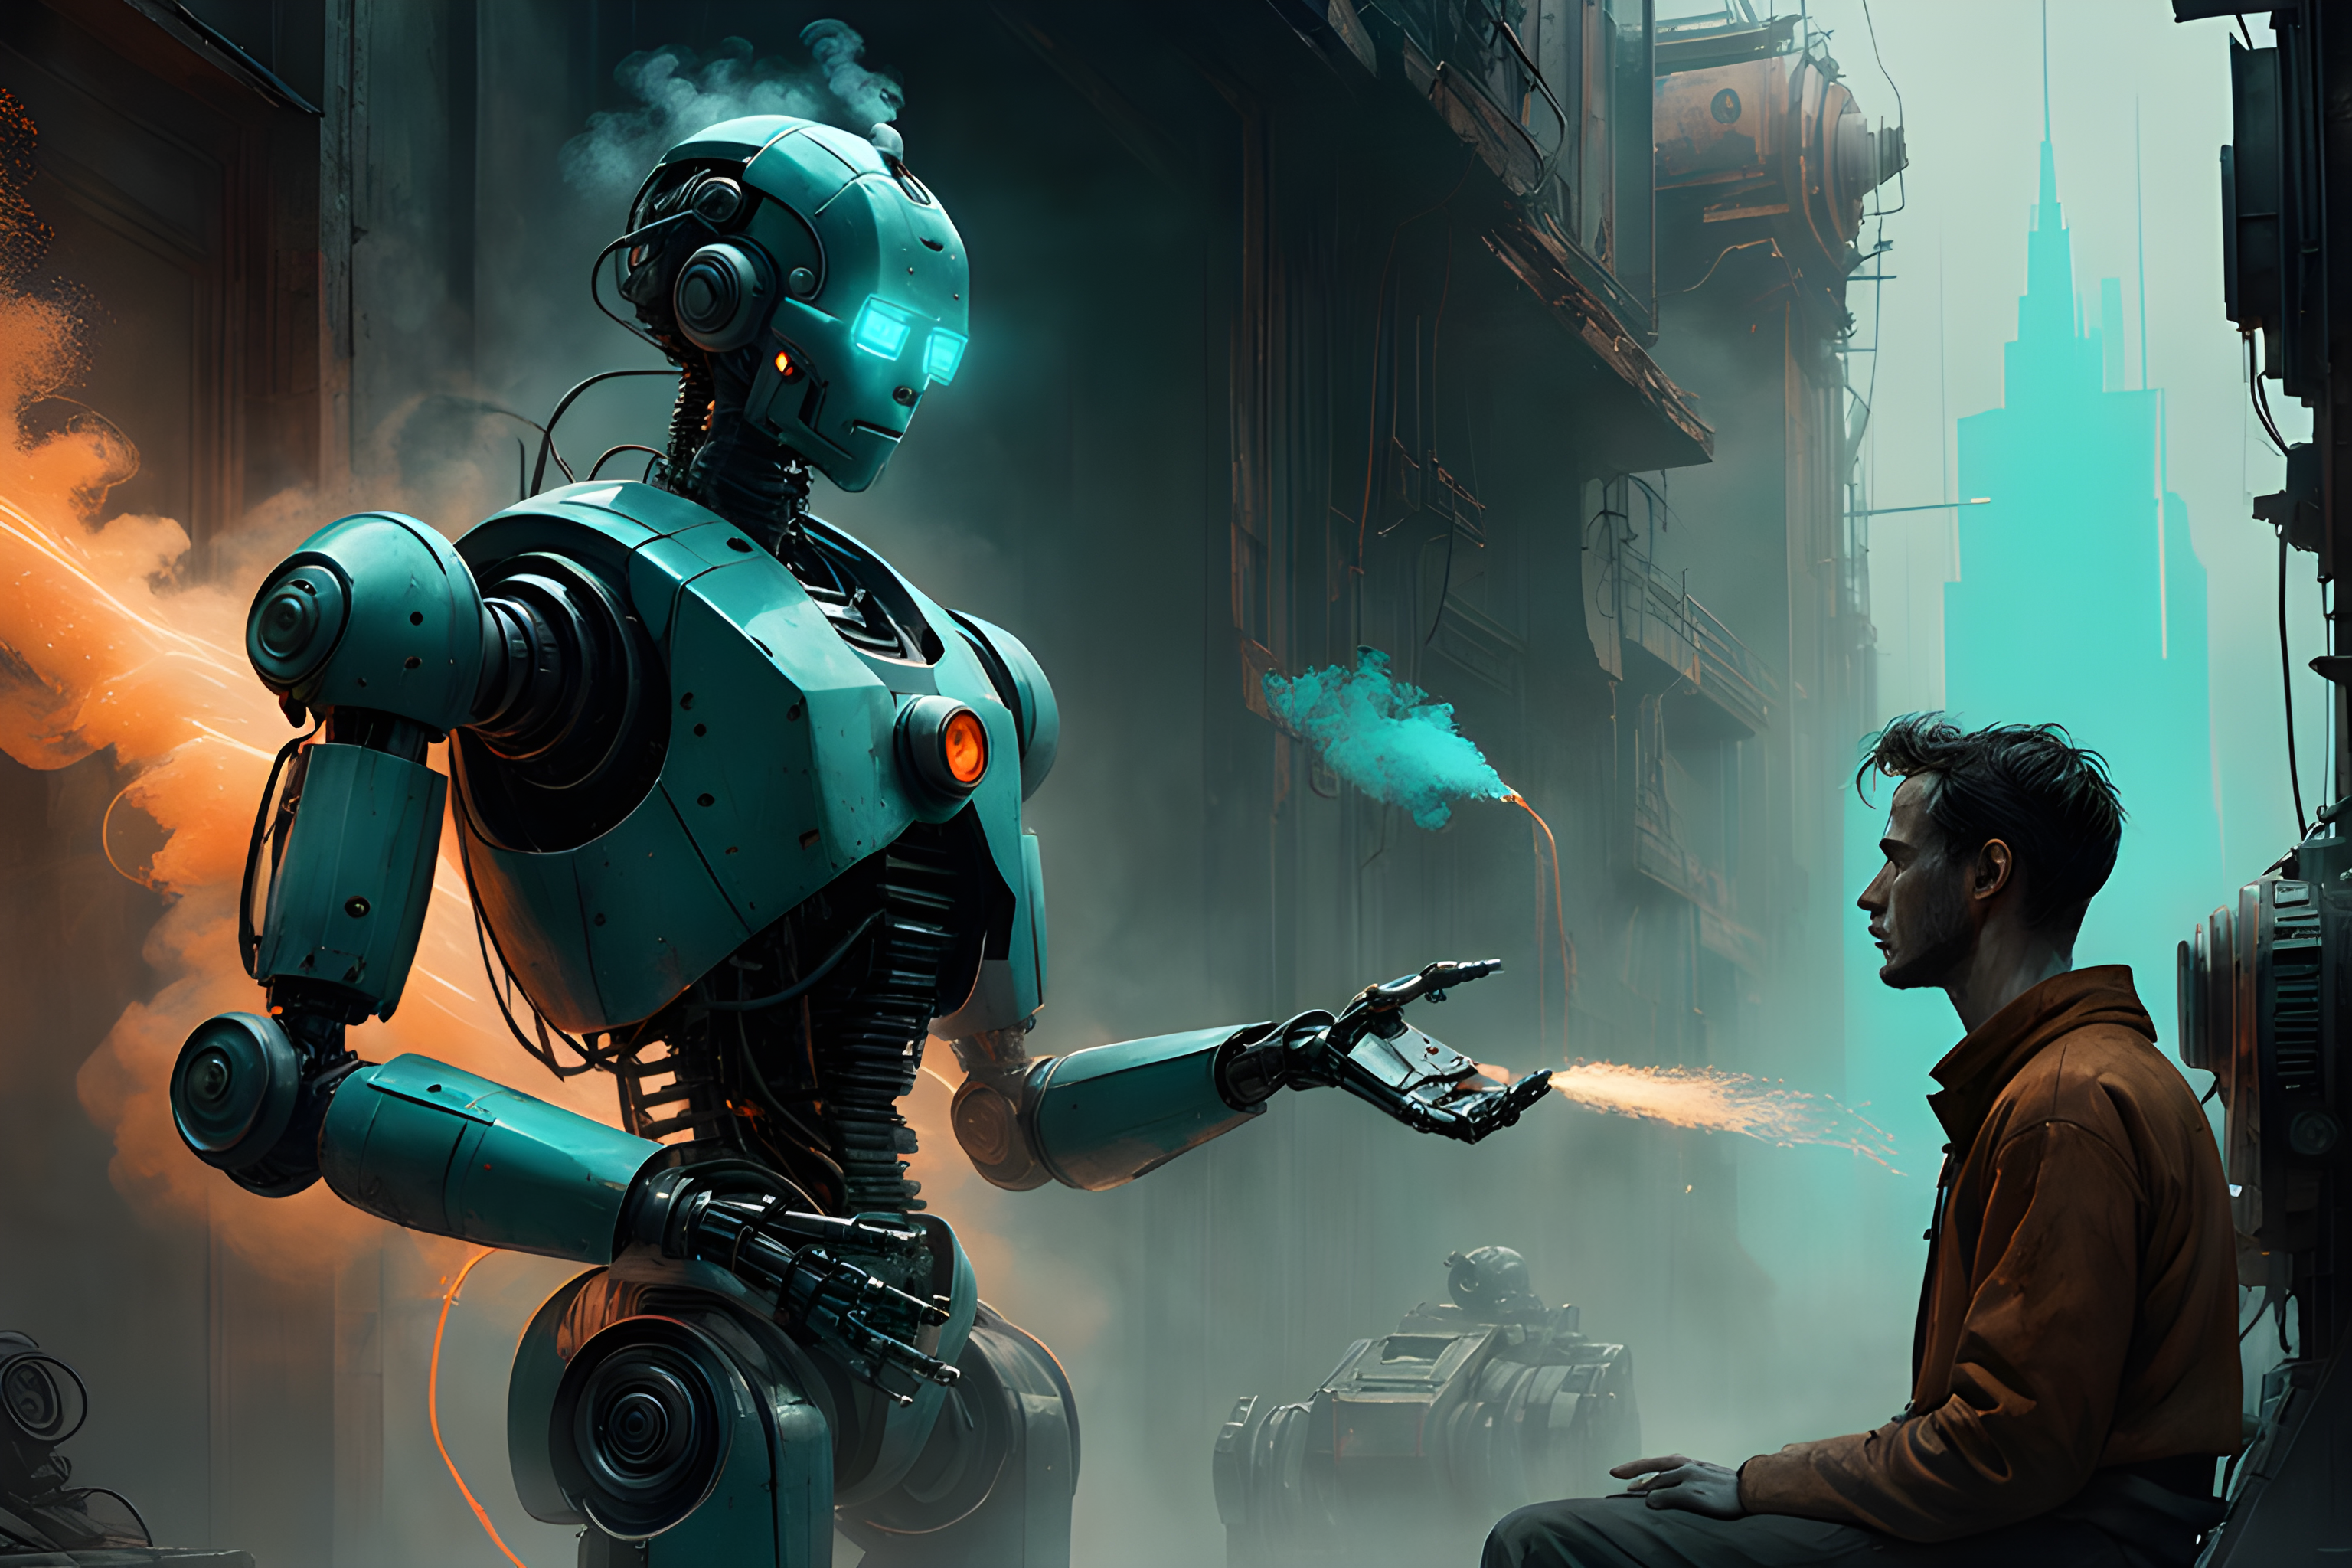 male-human-having-a-conversation-with-a-robot-cinematic-light-backlight-windy-teal-orange-smoke-449810782